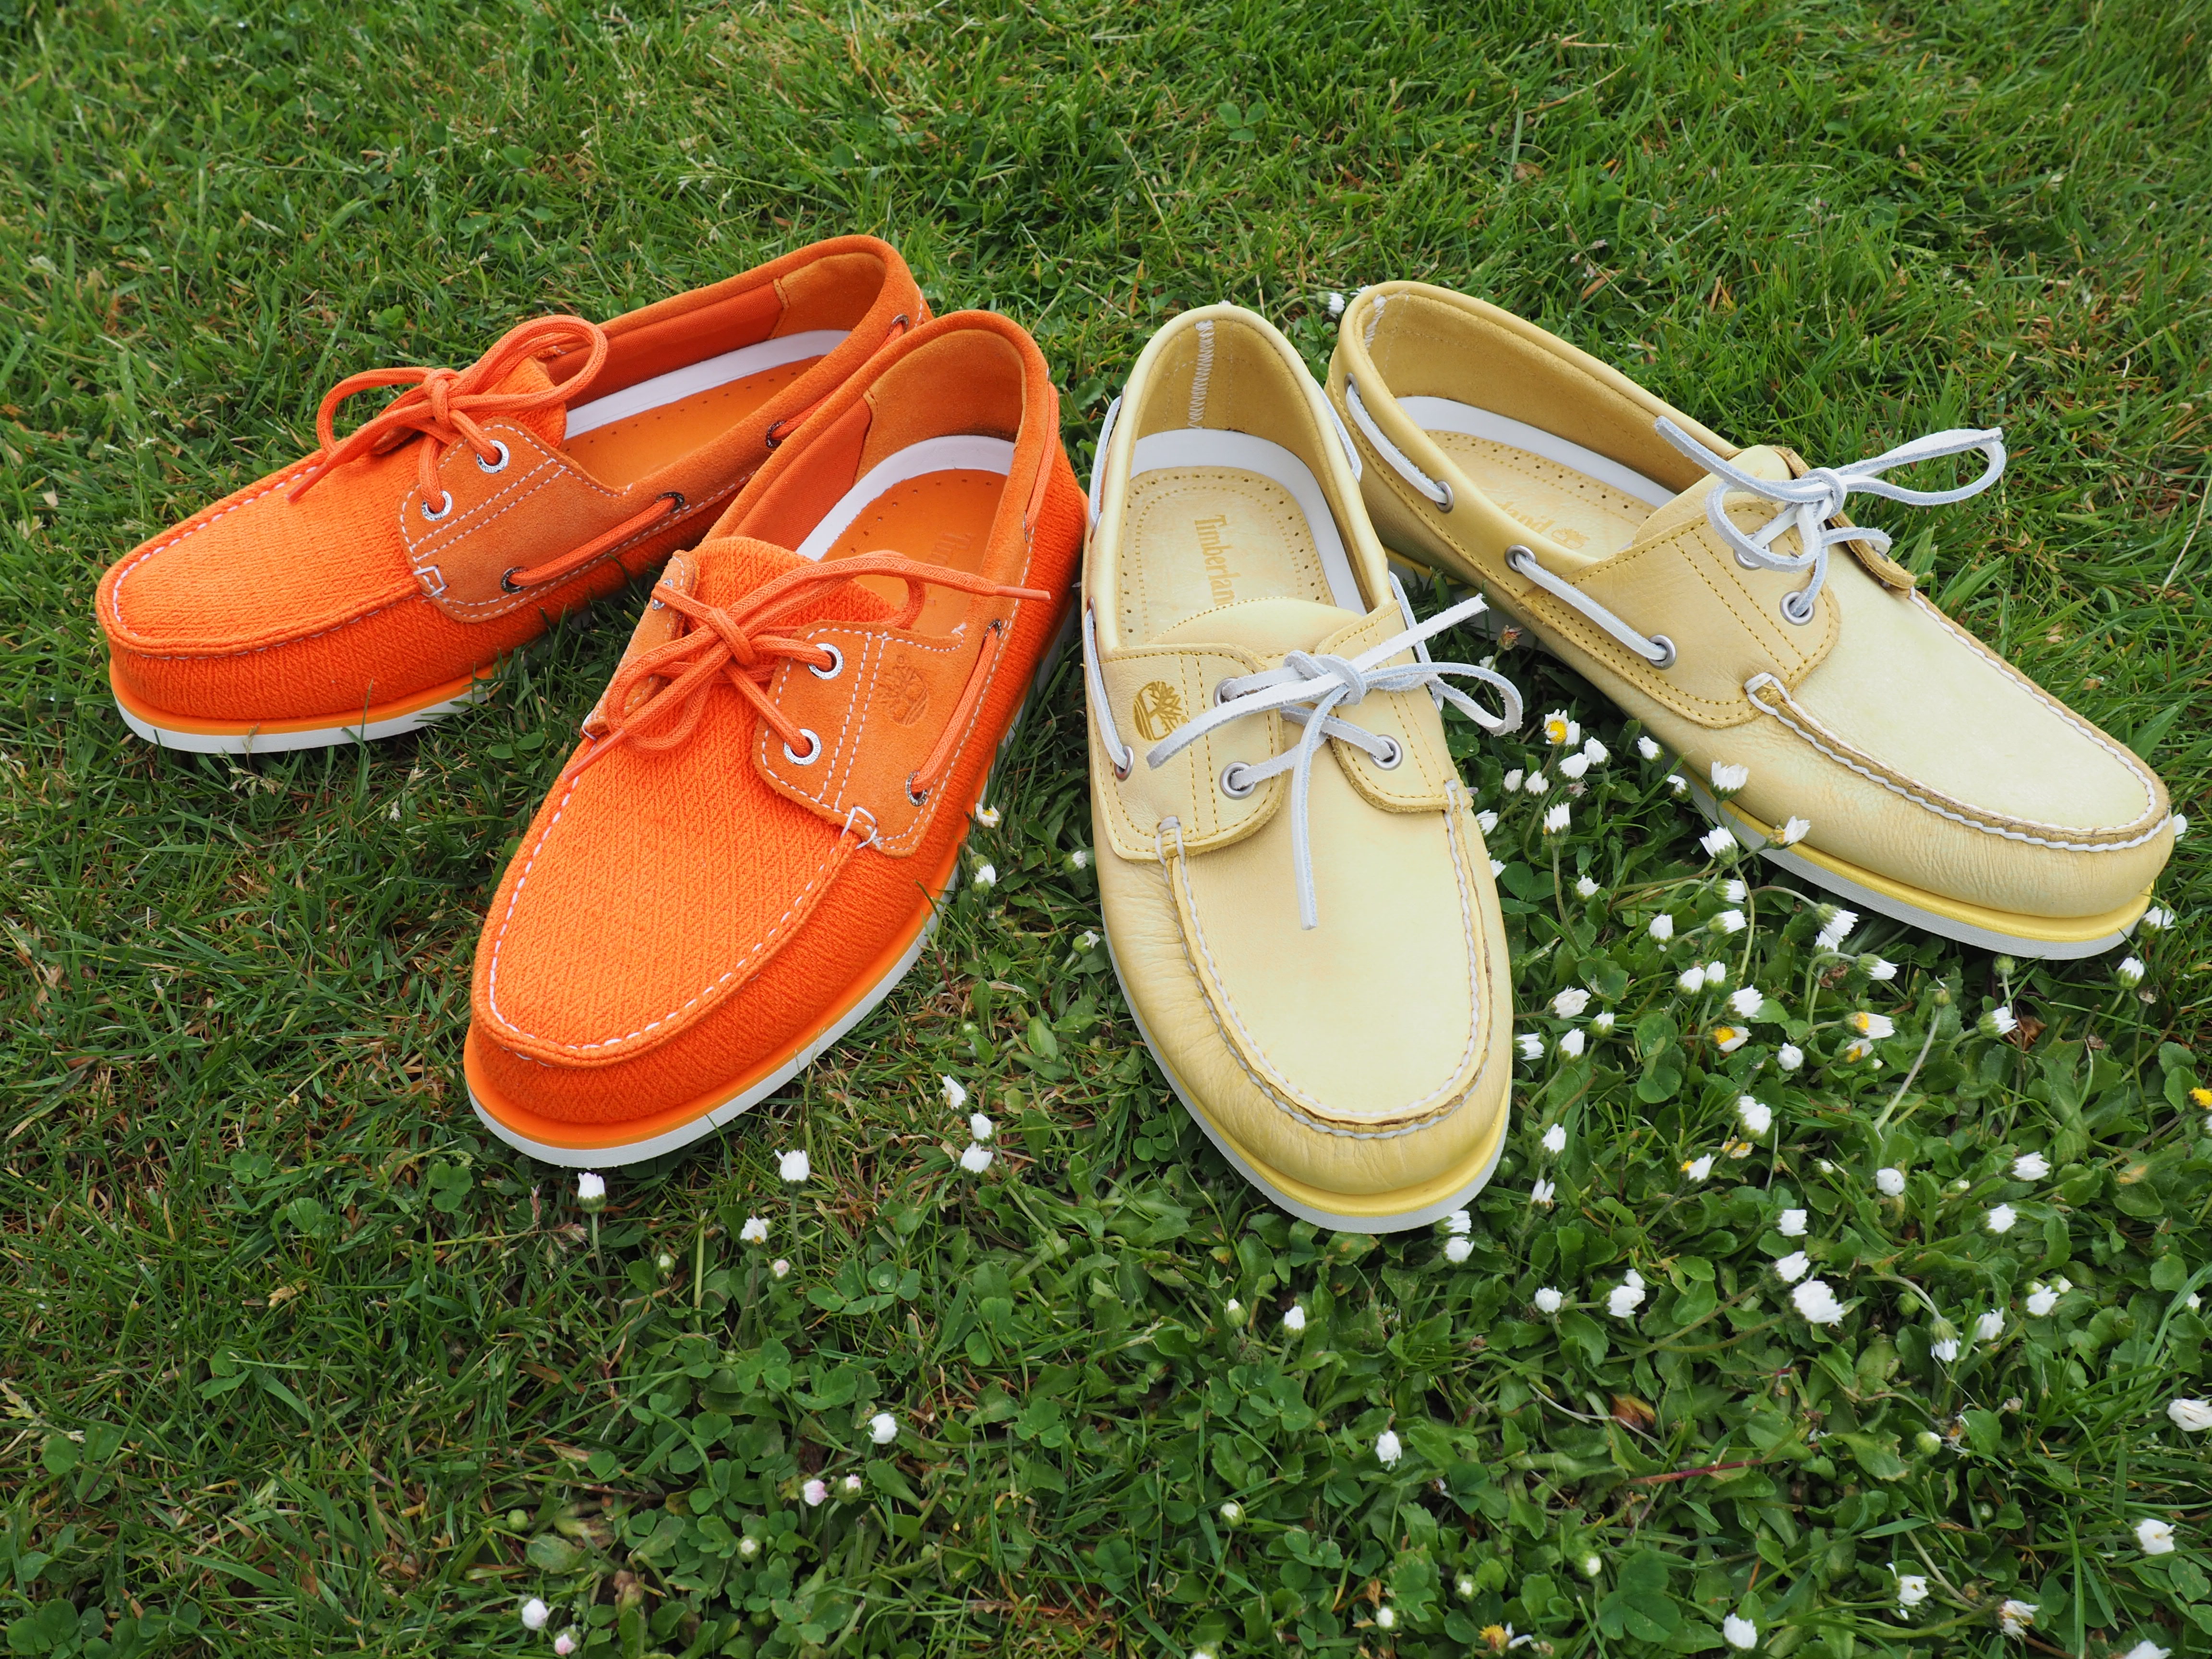 Summer Boat Shoes from Timberland